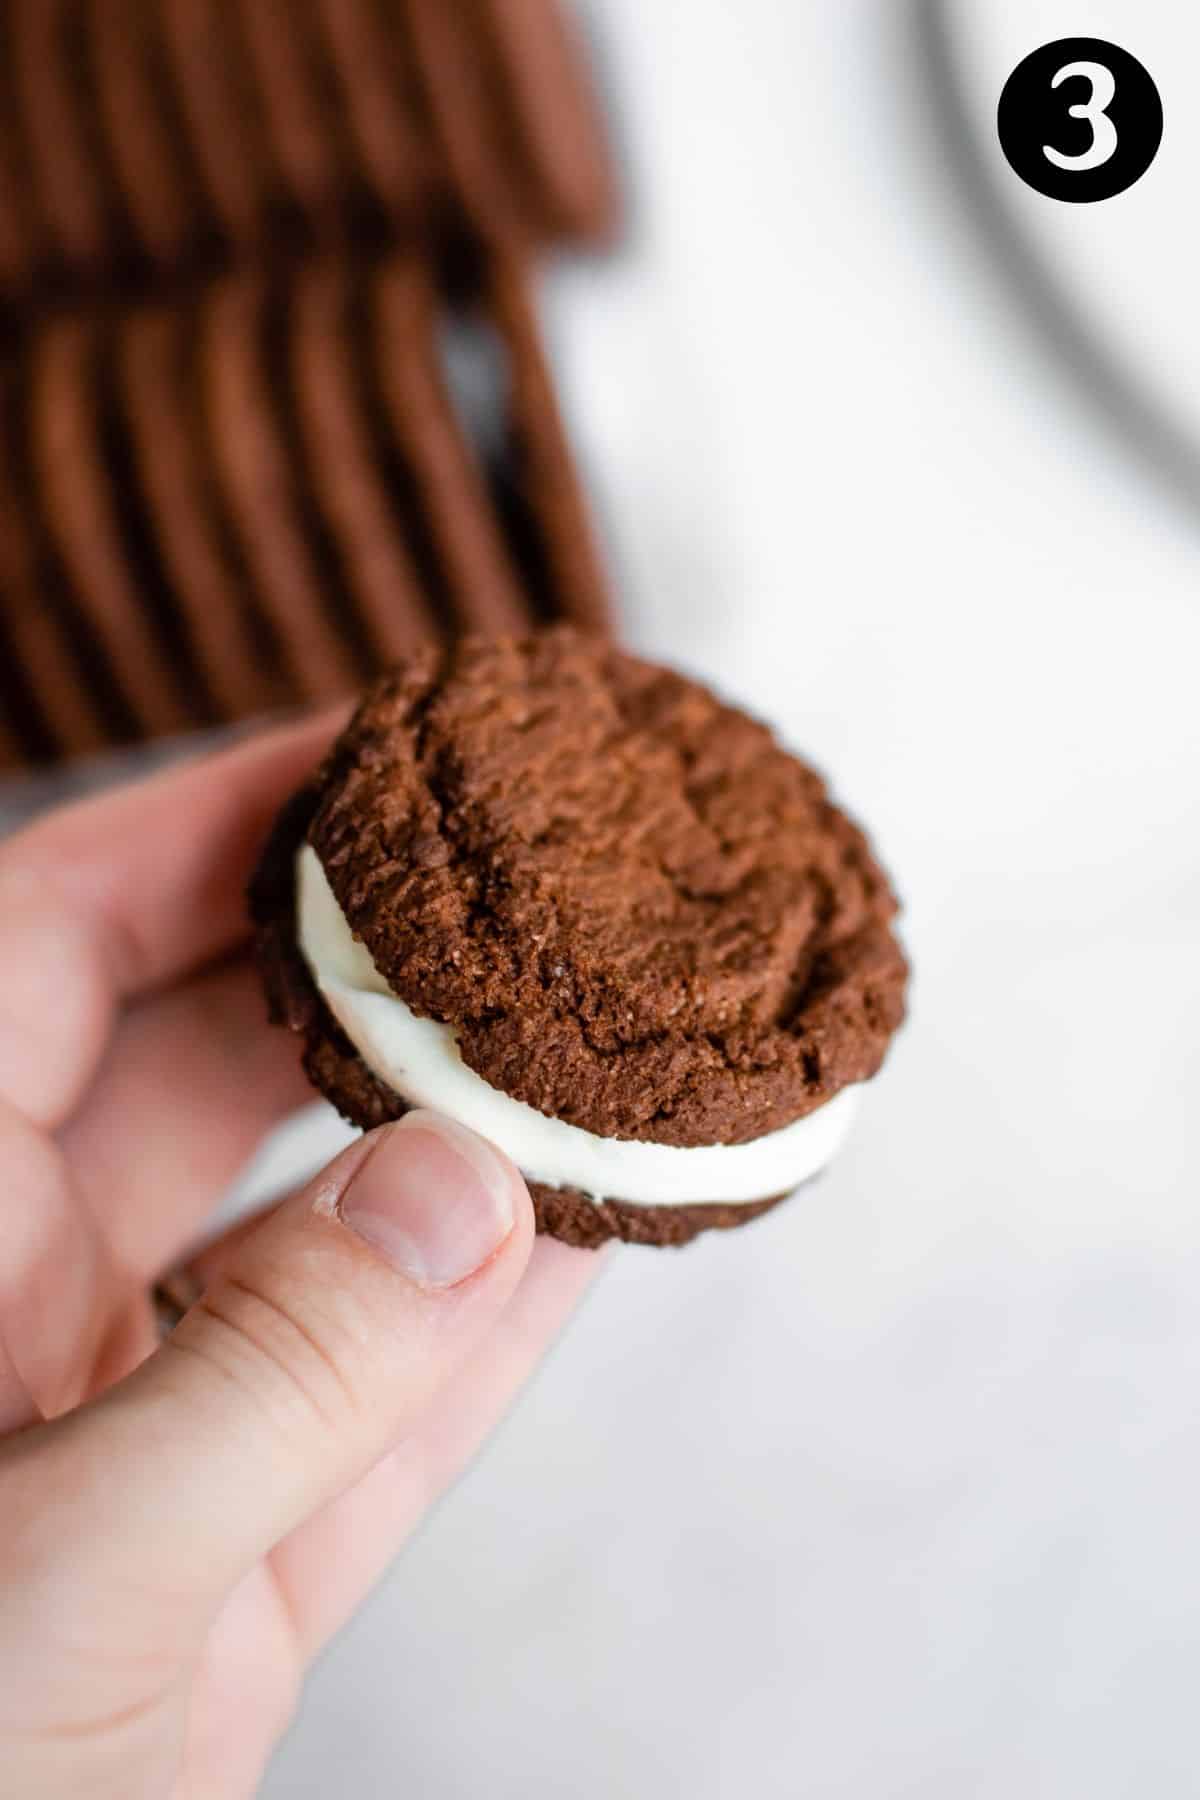 hand holding chocolate cookies with cream in the middle